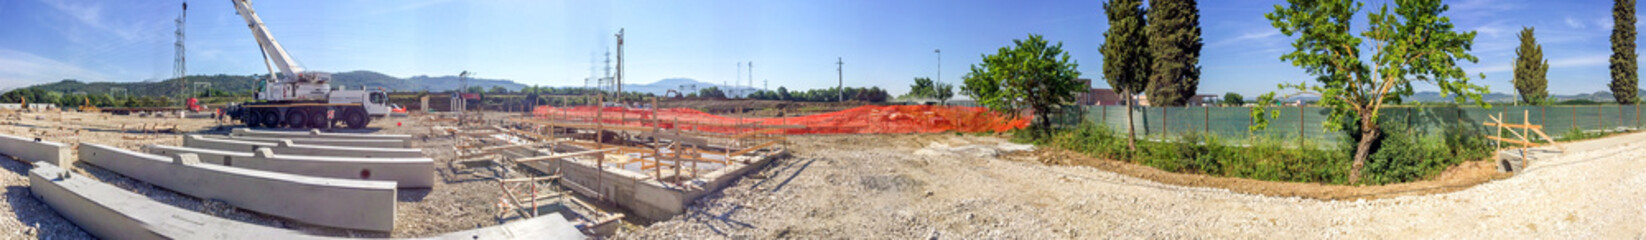 Industrial construction site panoramic view